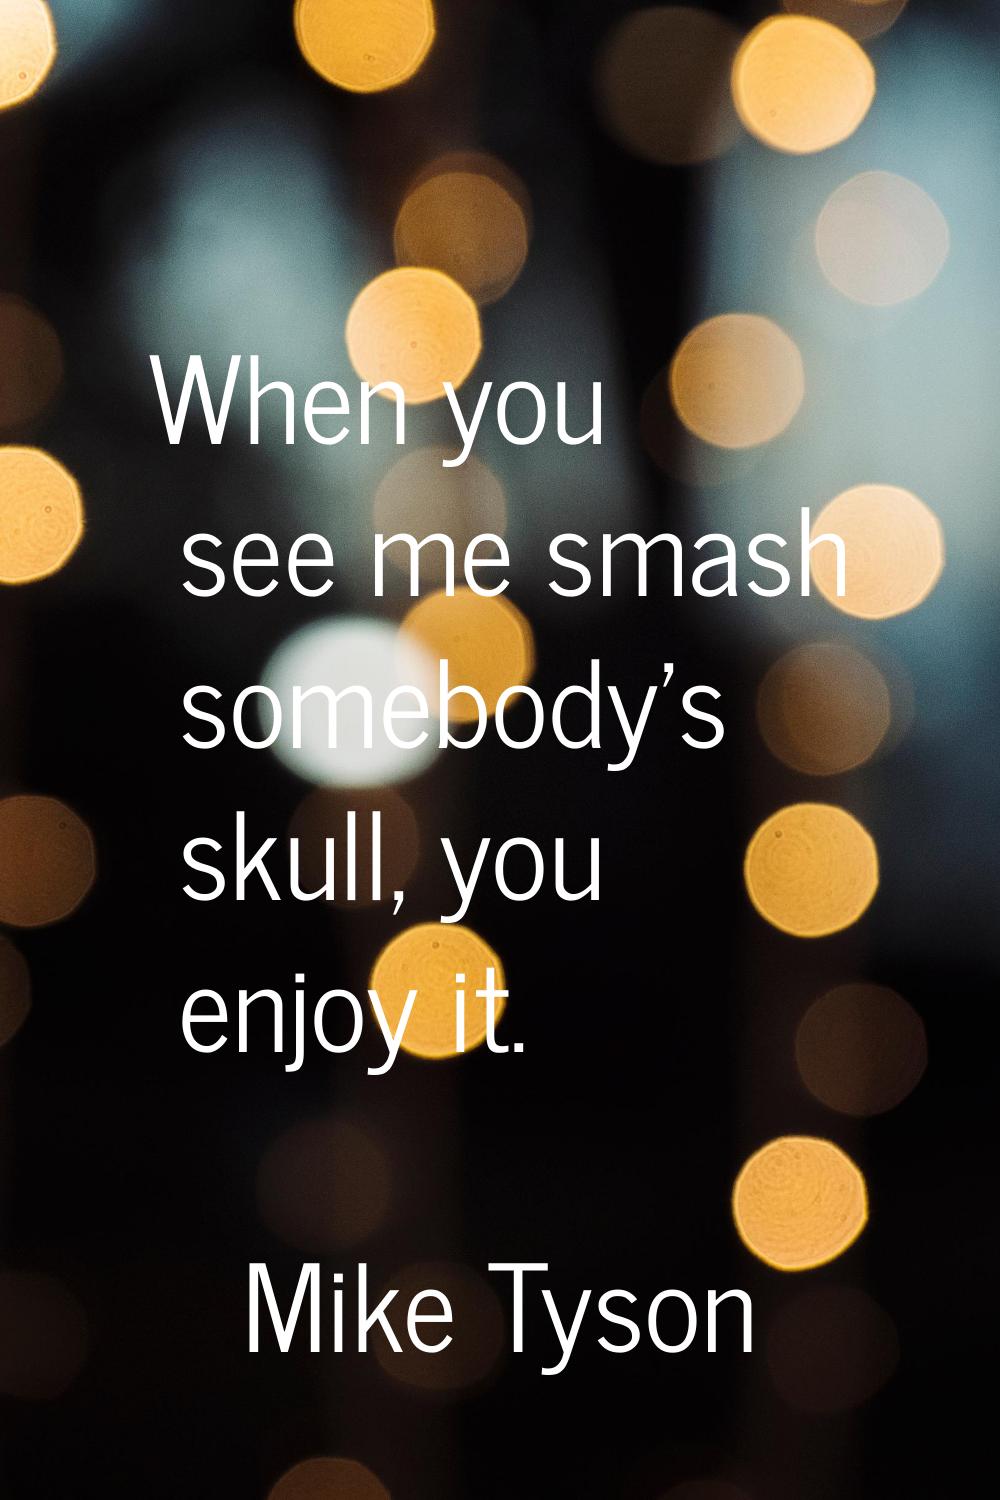 When you see me smash somebody's skull, you enjoy it.